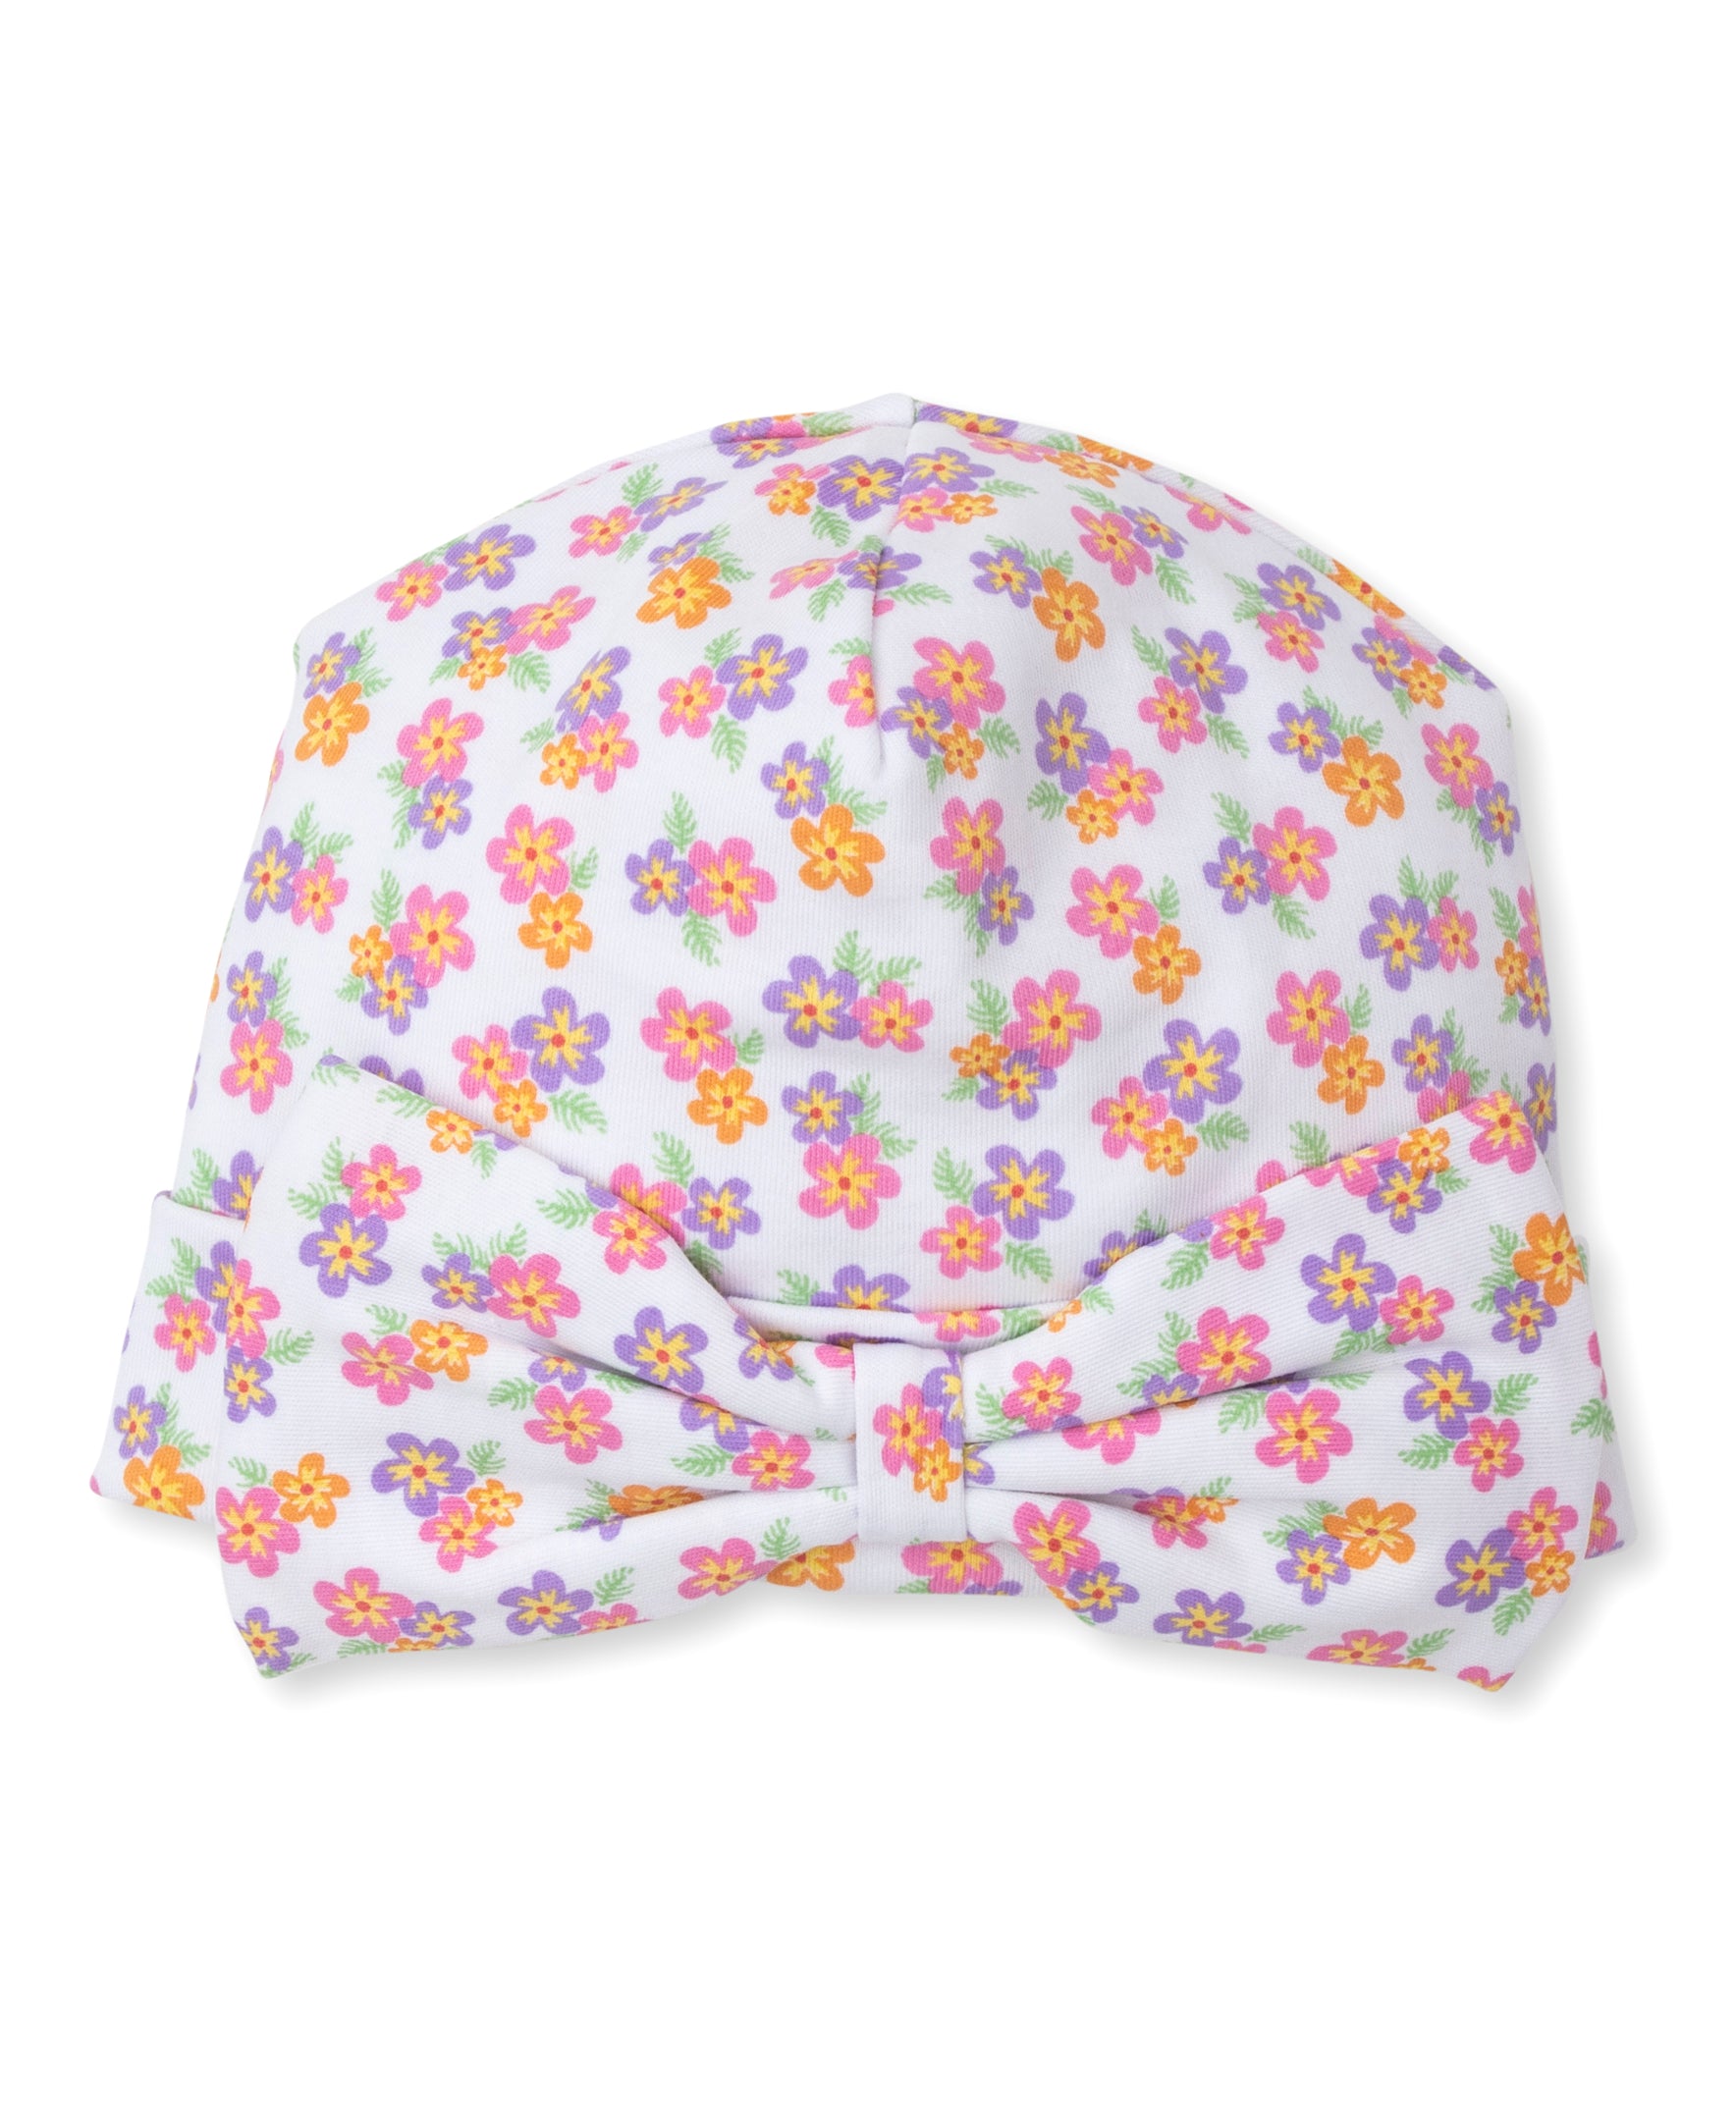 Aloha Whales Floral Novelty Hat